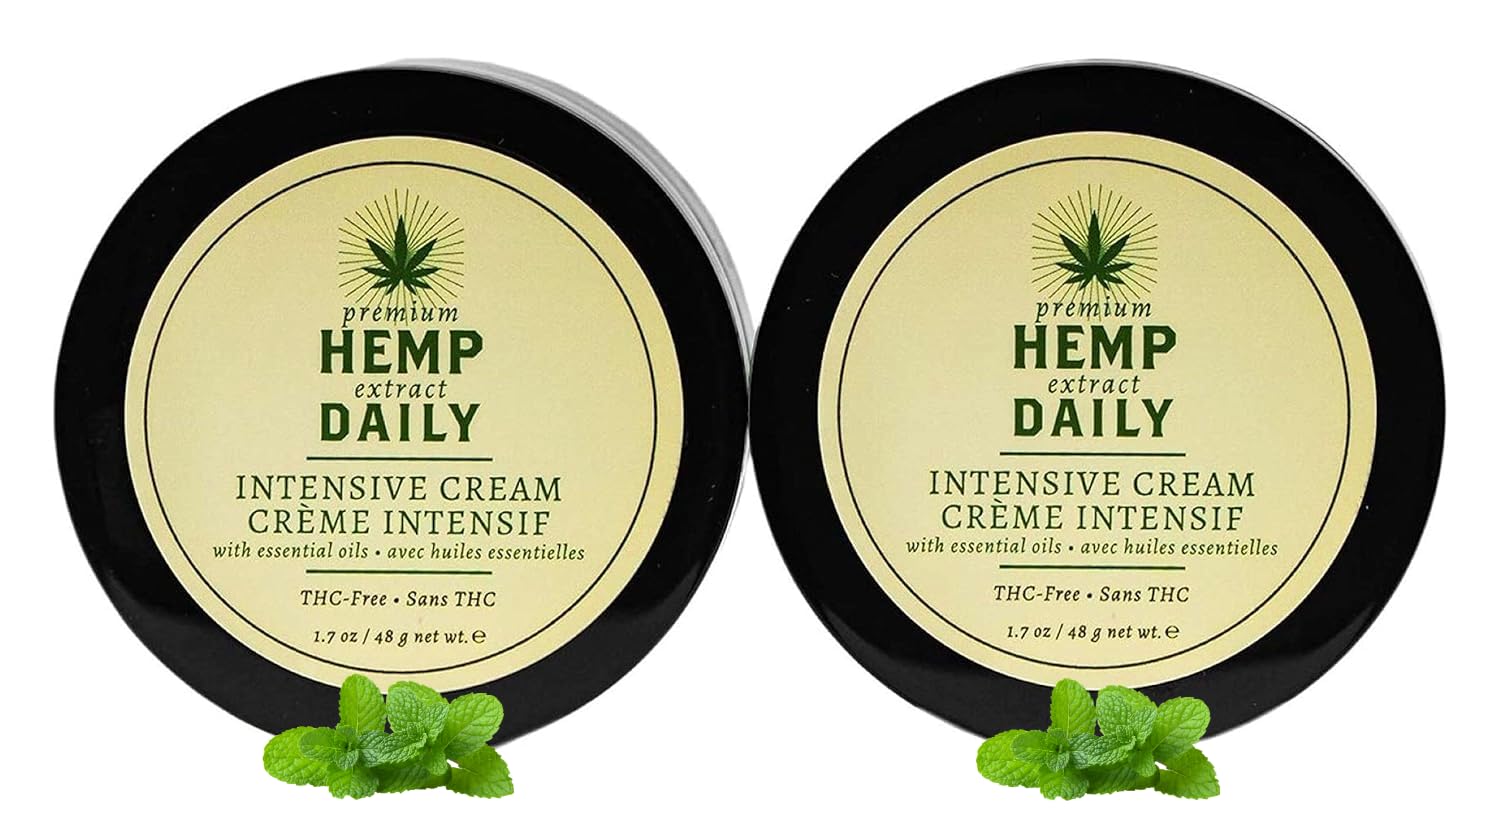 Earthly Body Intensive Cream - Topical Muscle, Knees, Joints, Back, Neck and Shoulder Rub - Organic Ingredients - 1.7 Ounces (Classic Mint, Single)